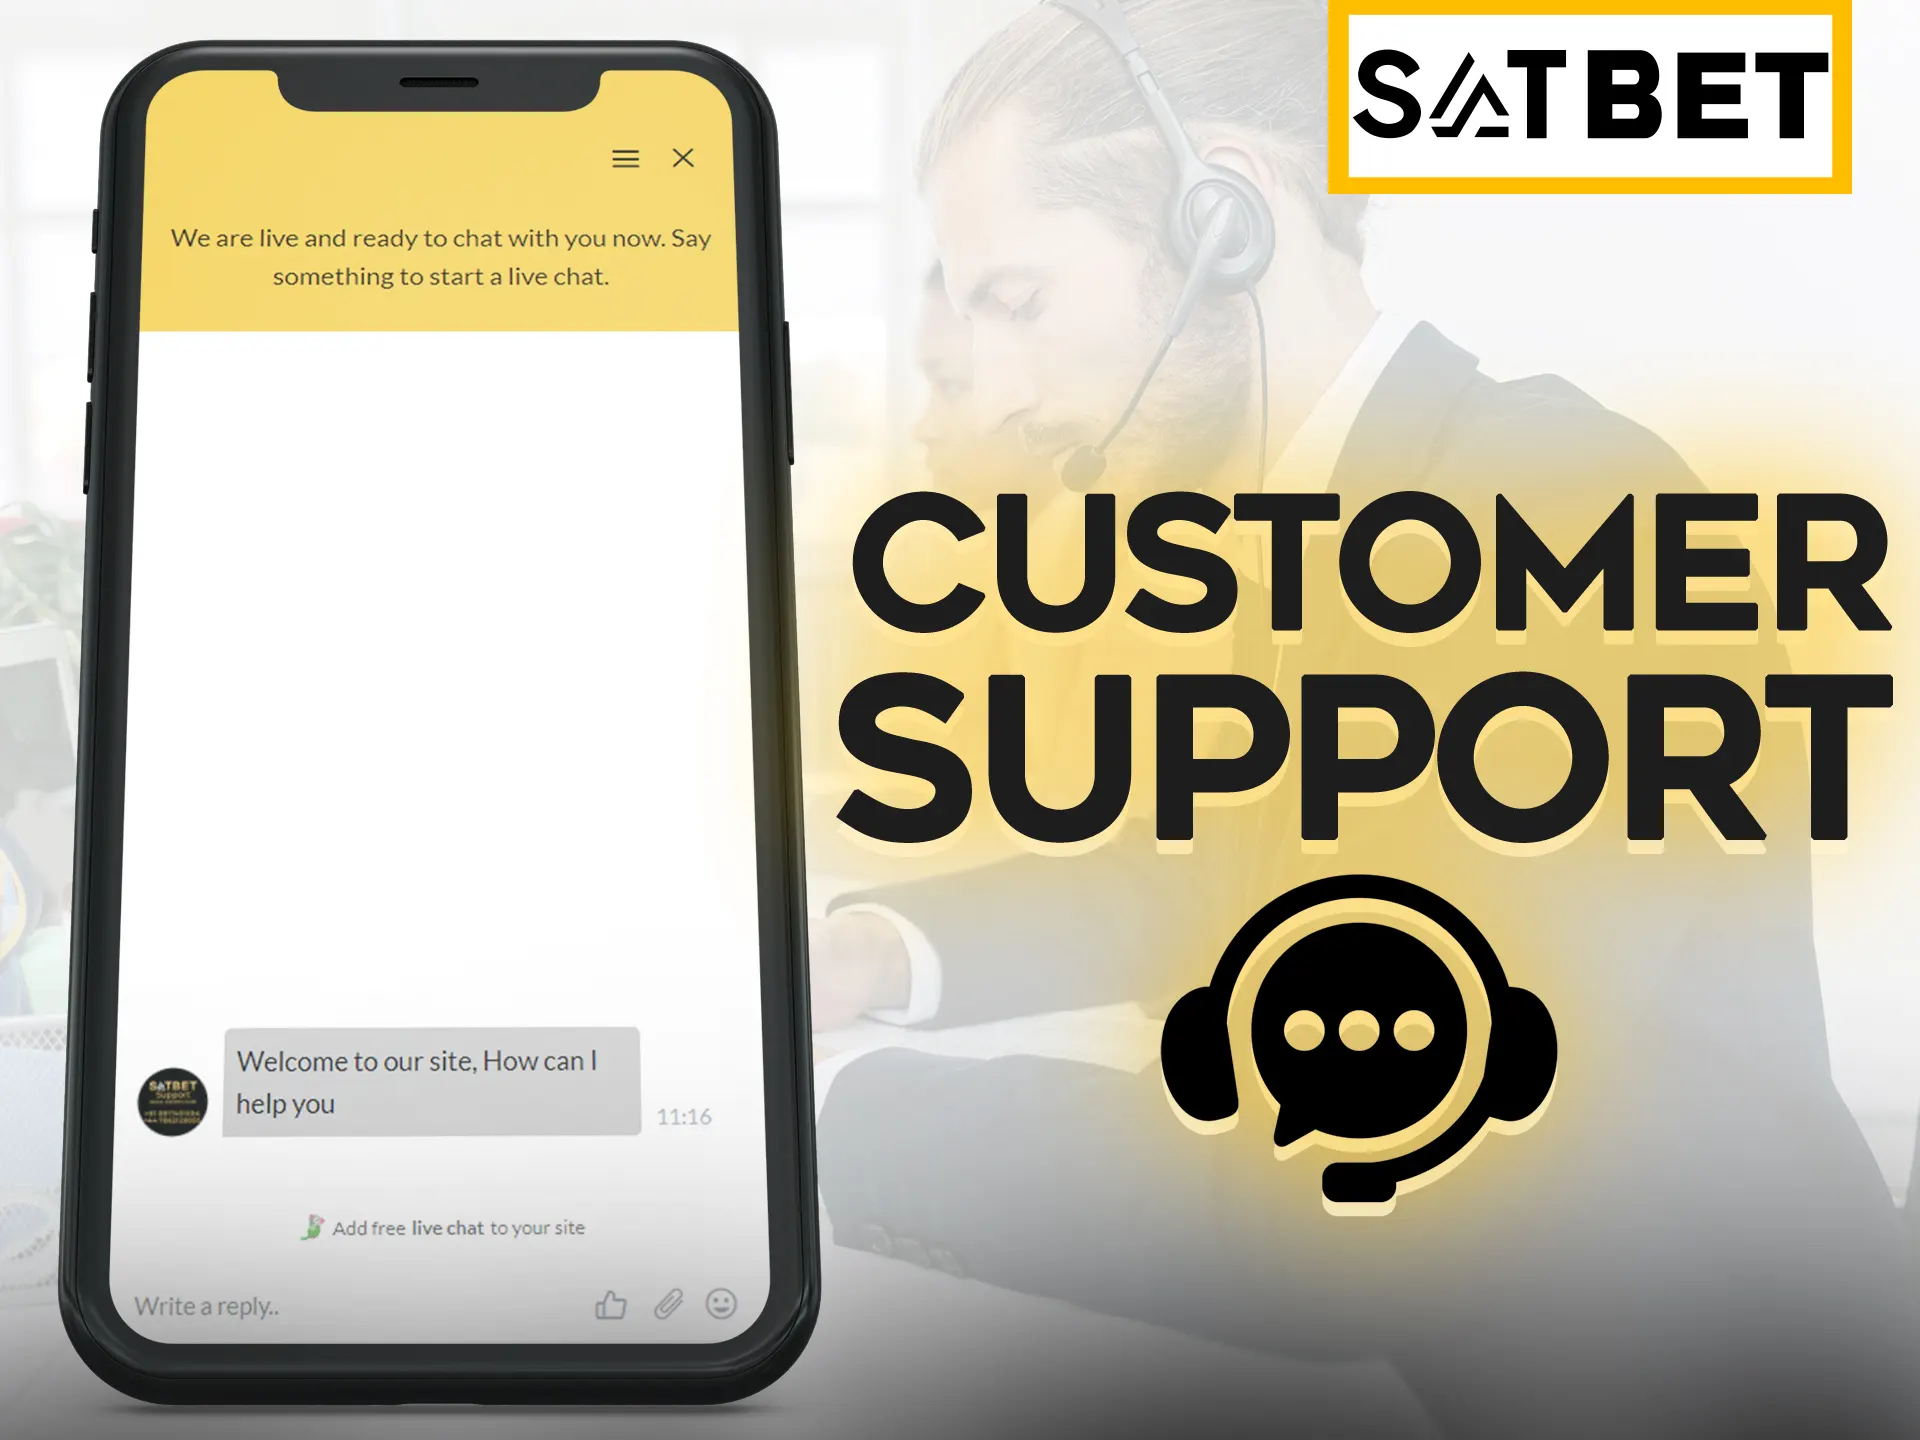 Ask any question to Satbet support.